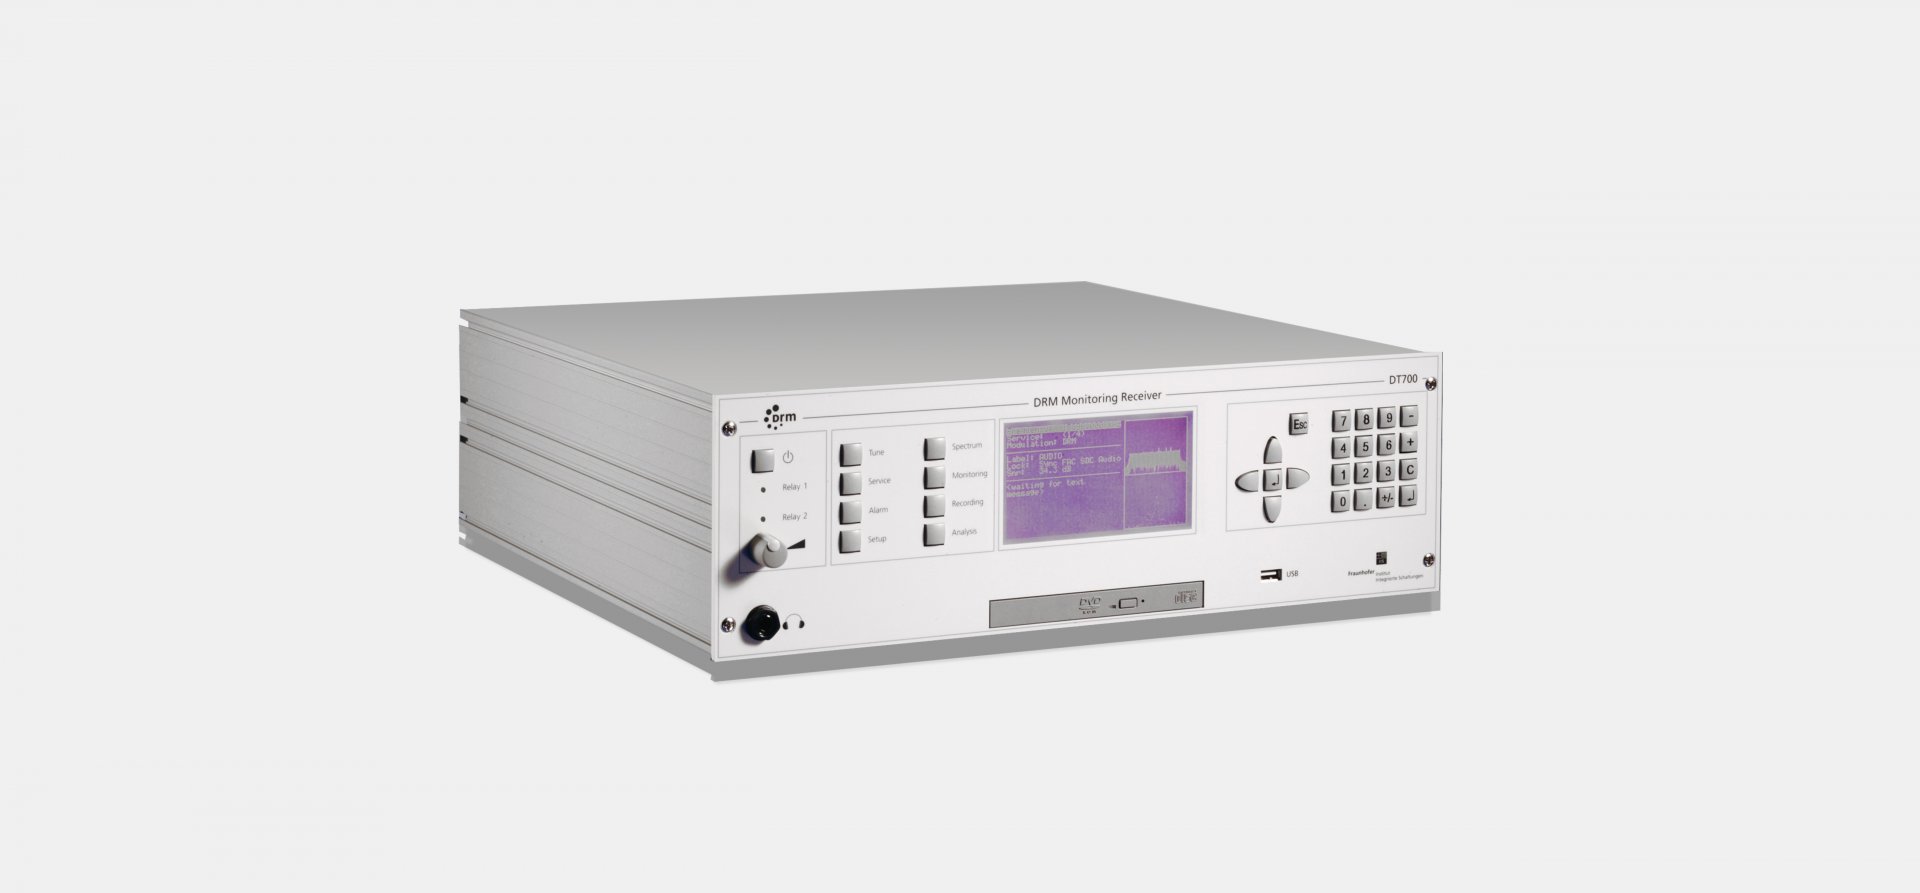 DT700 Monitoring Receiver